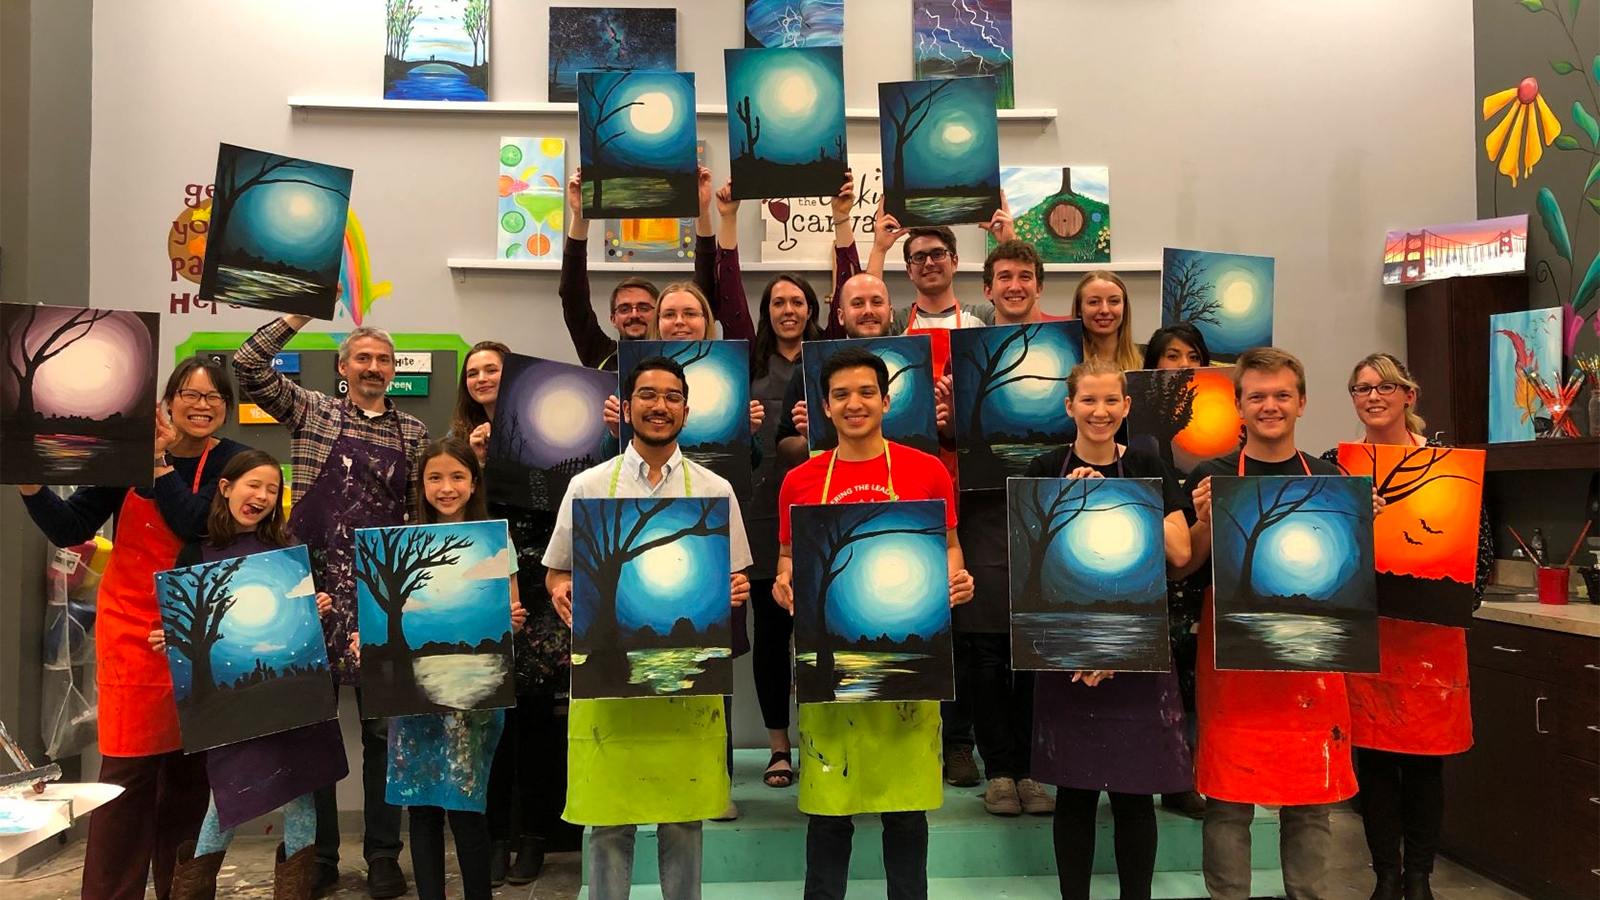 Dr. Wang (far left) and the Nebraska Acoustics Group, celebrating the End-of-the-Academic-Year in 2019 at Corky Canvas in Omaha